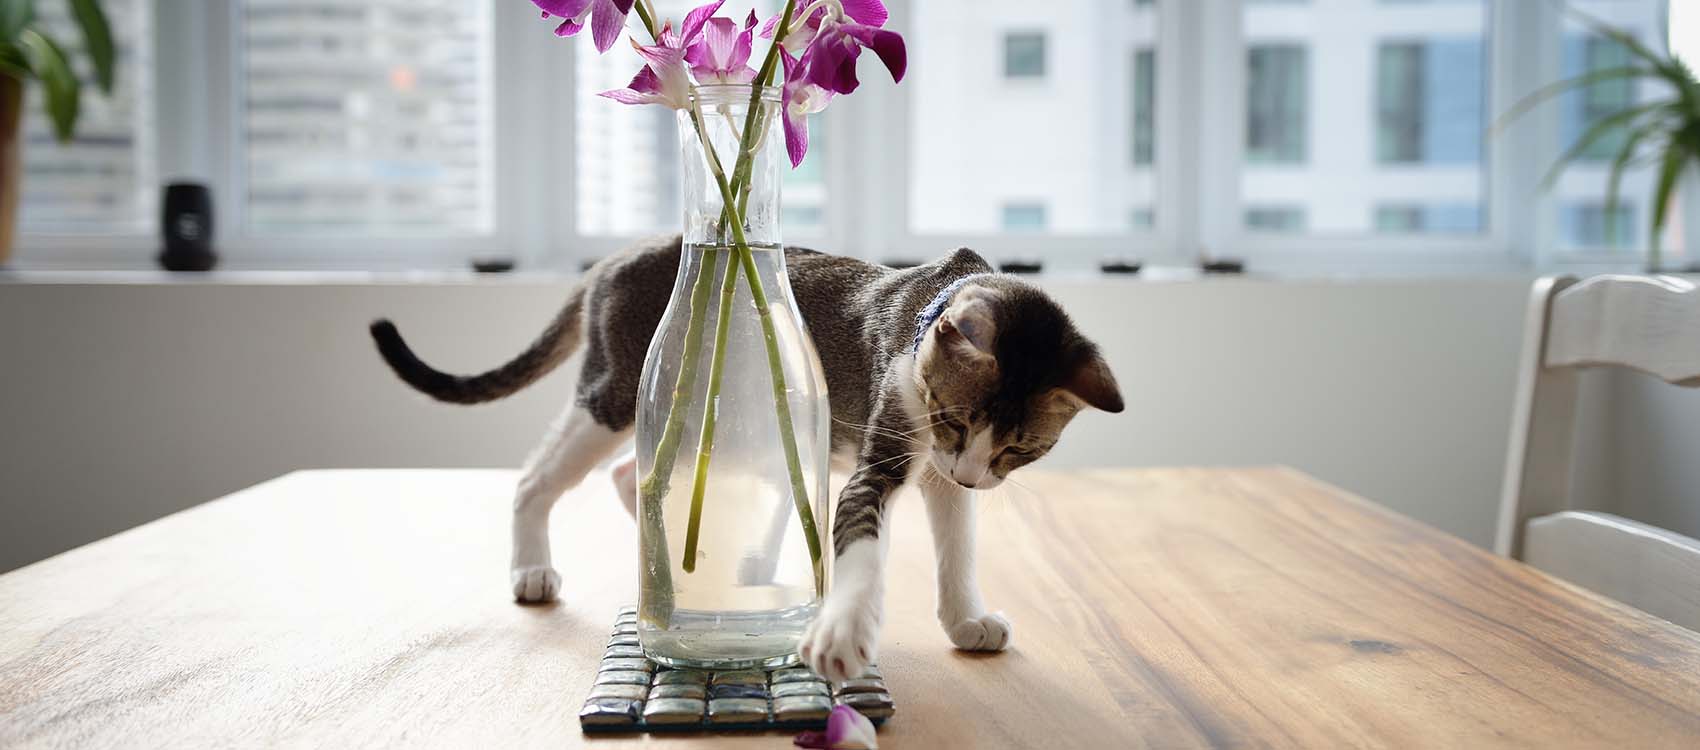 kitten playing with a vase of flowers on a wood table